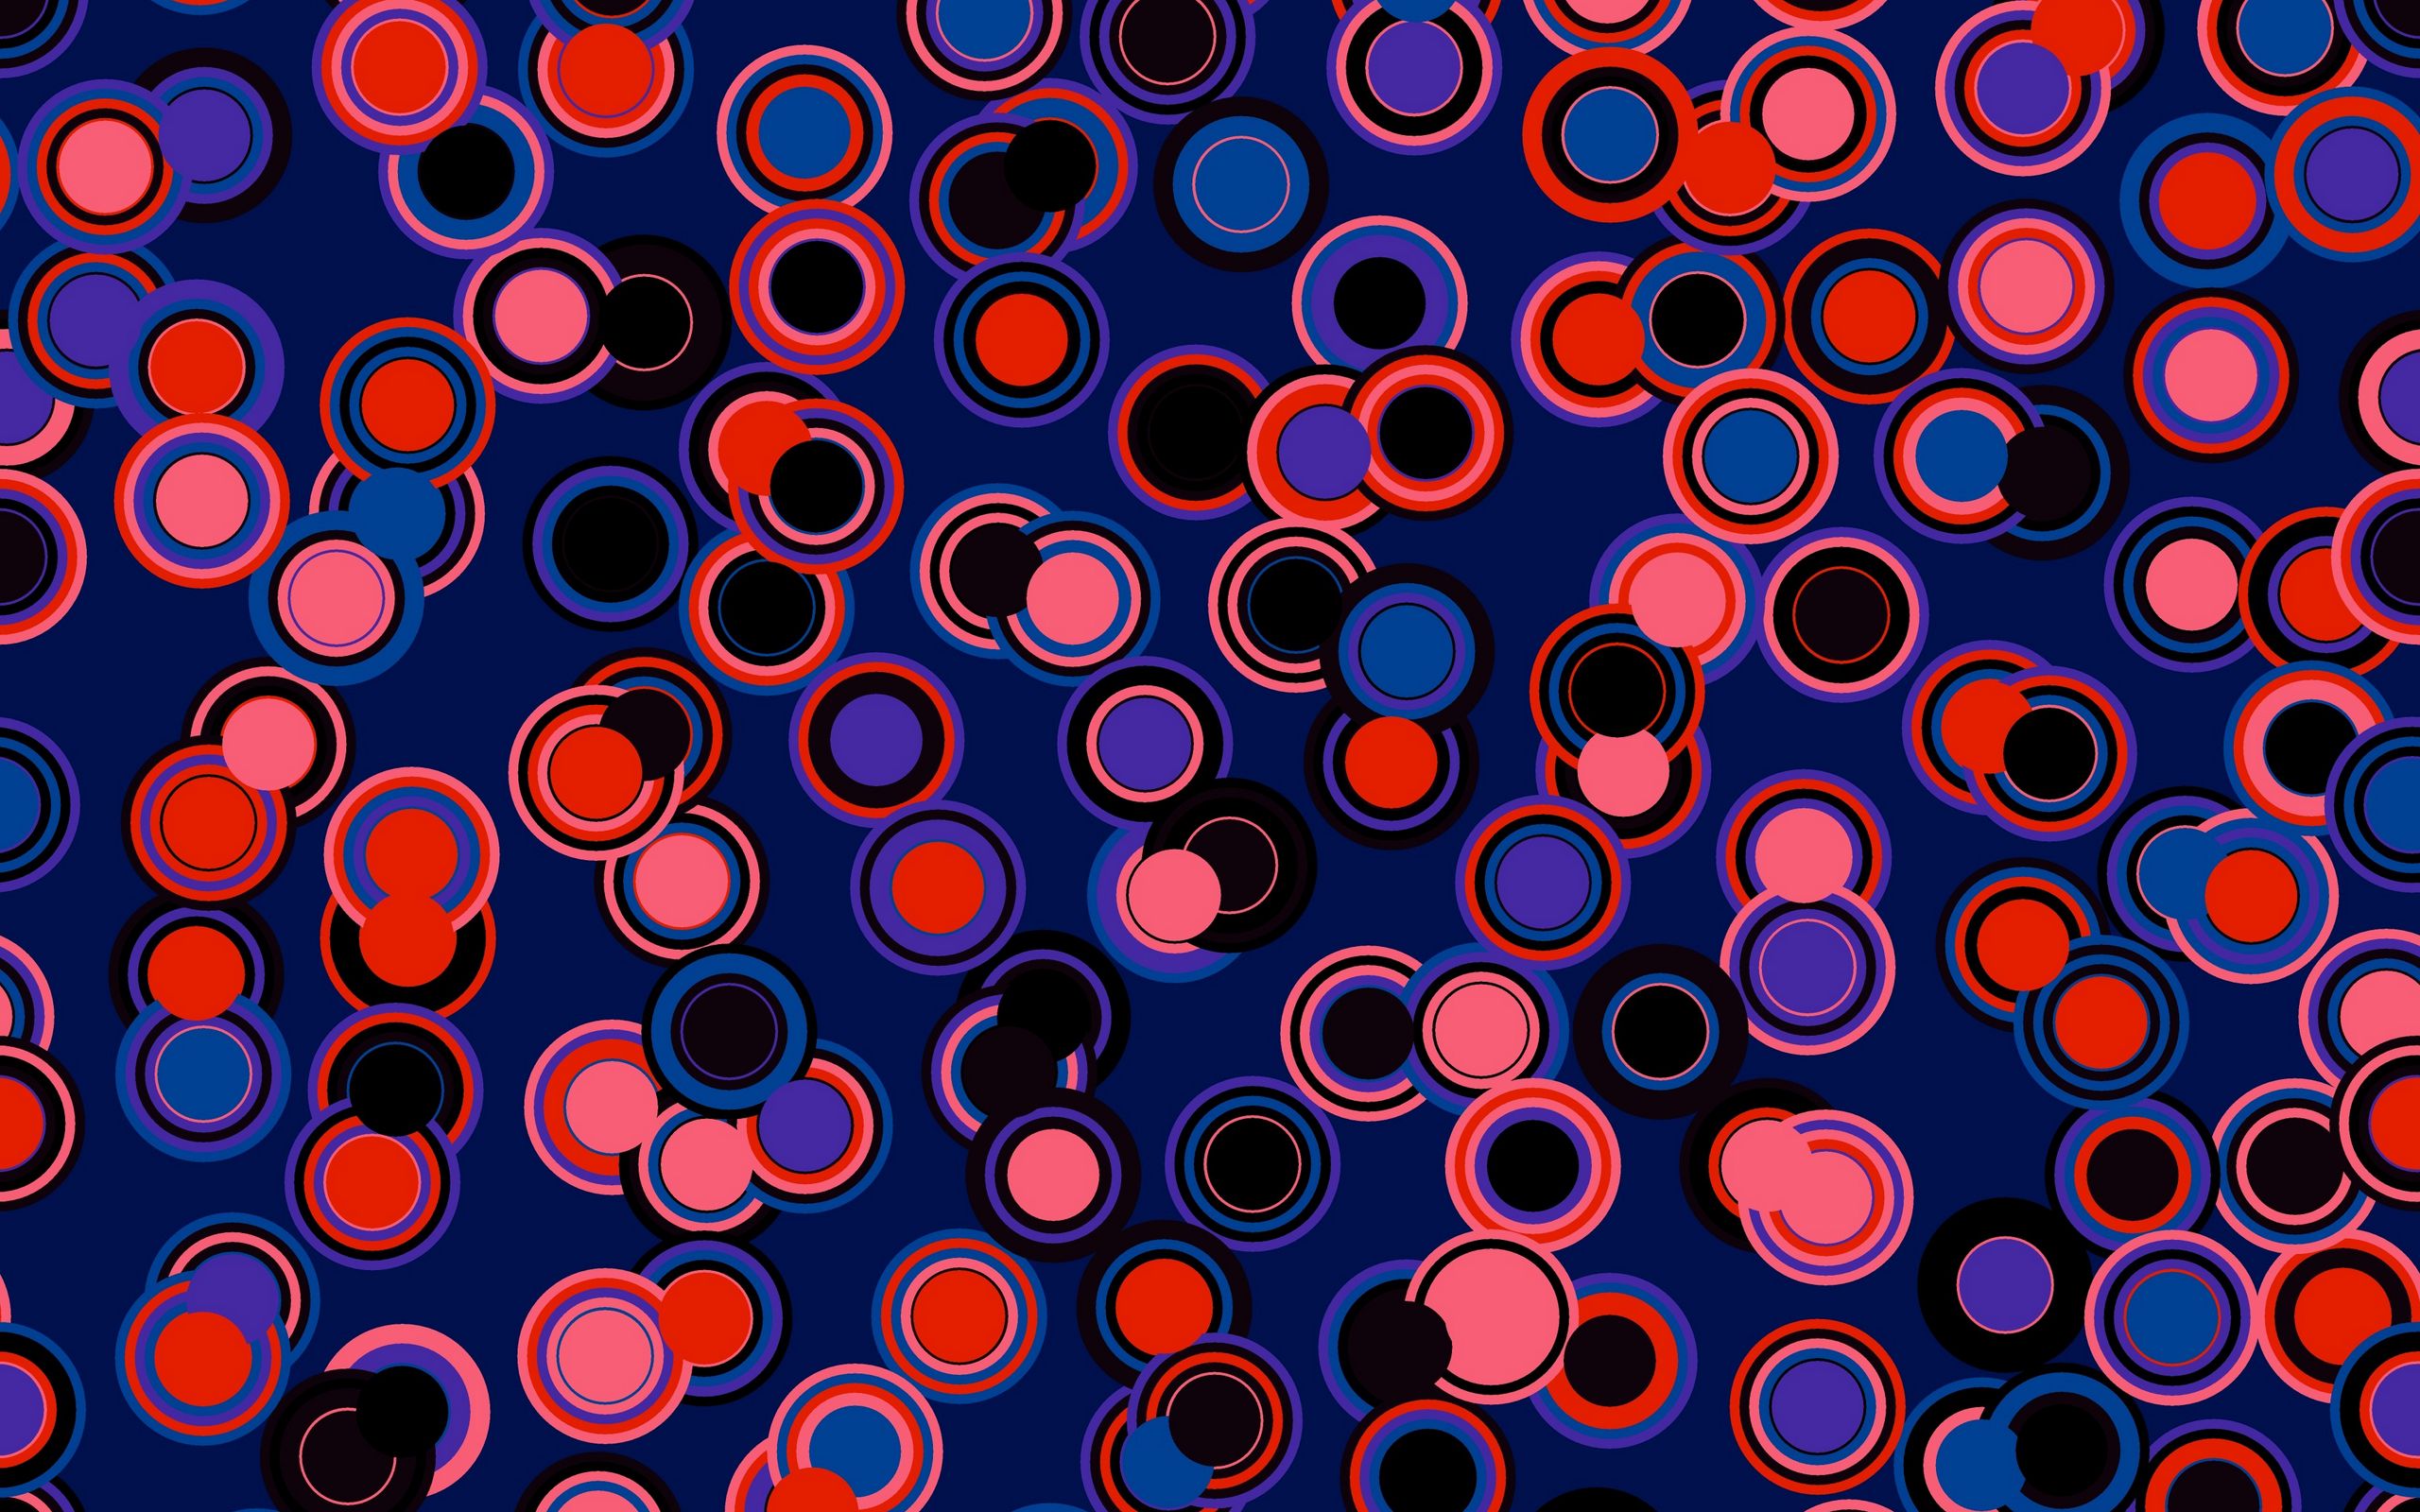 Download wallpaper 2560x1600 circles, shapes, texture, colorful widescreen 16:10 HD background